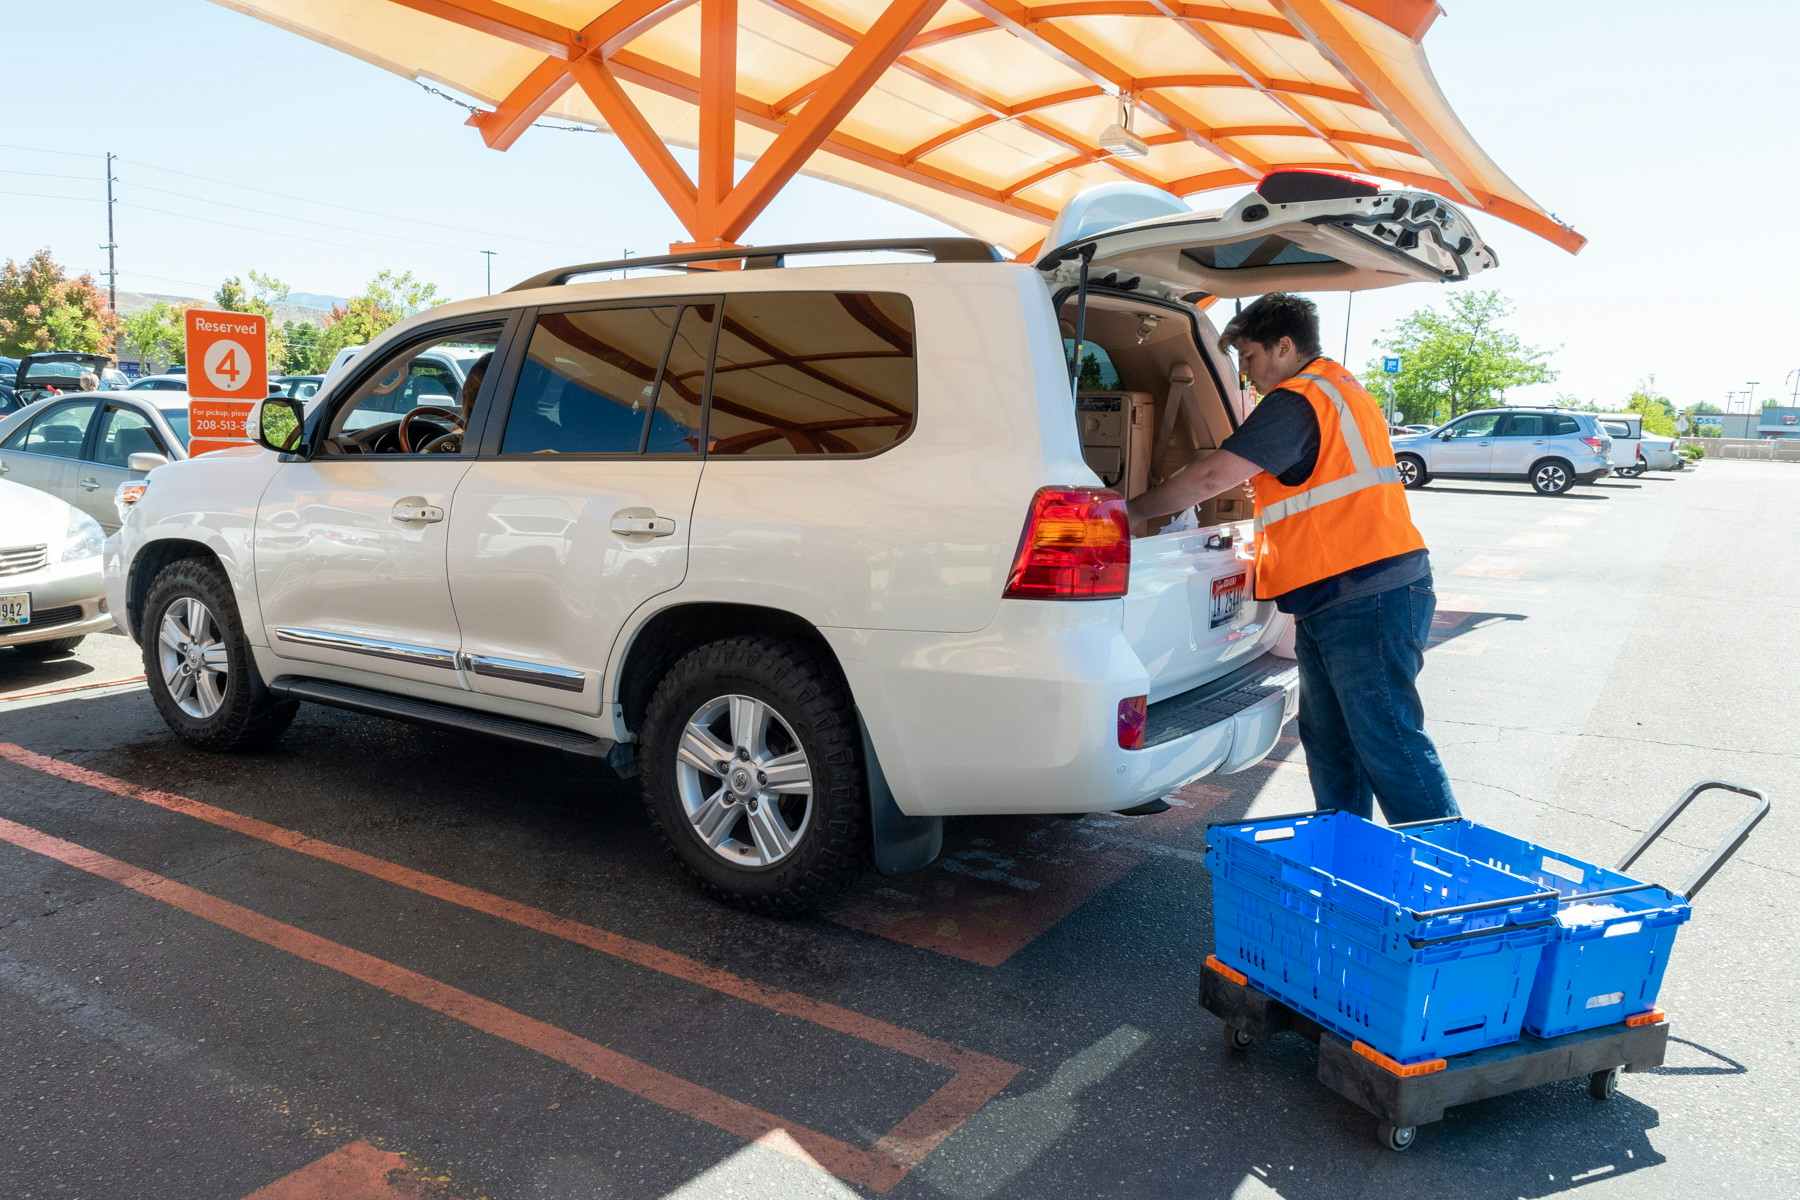 A Walmart employee putting groceries in the back of a white SUV.